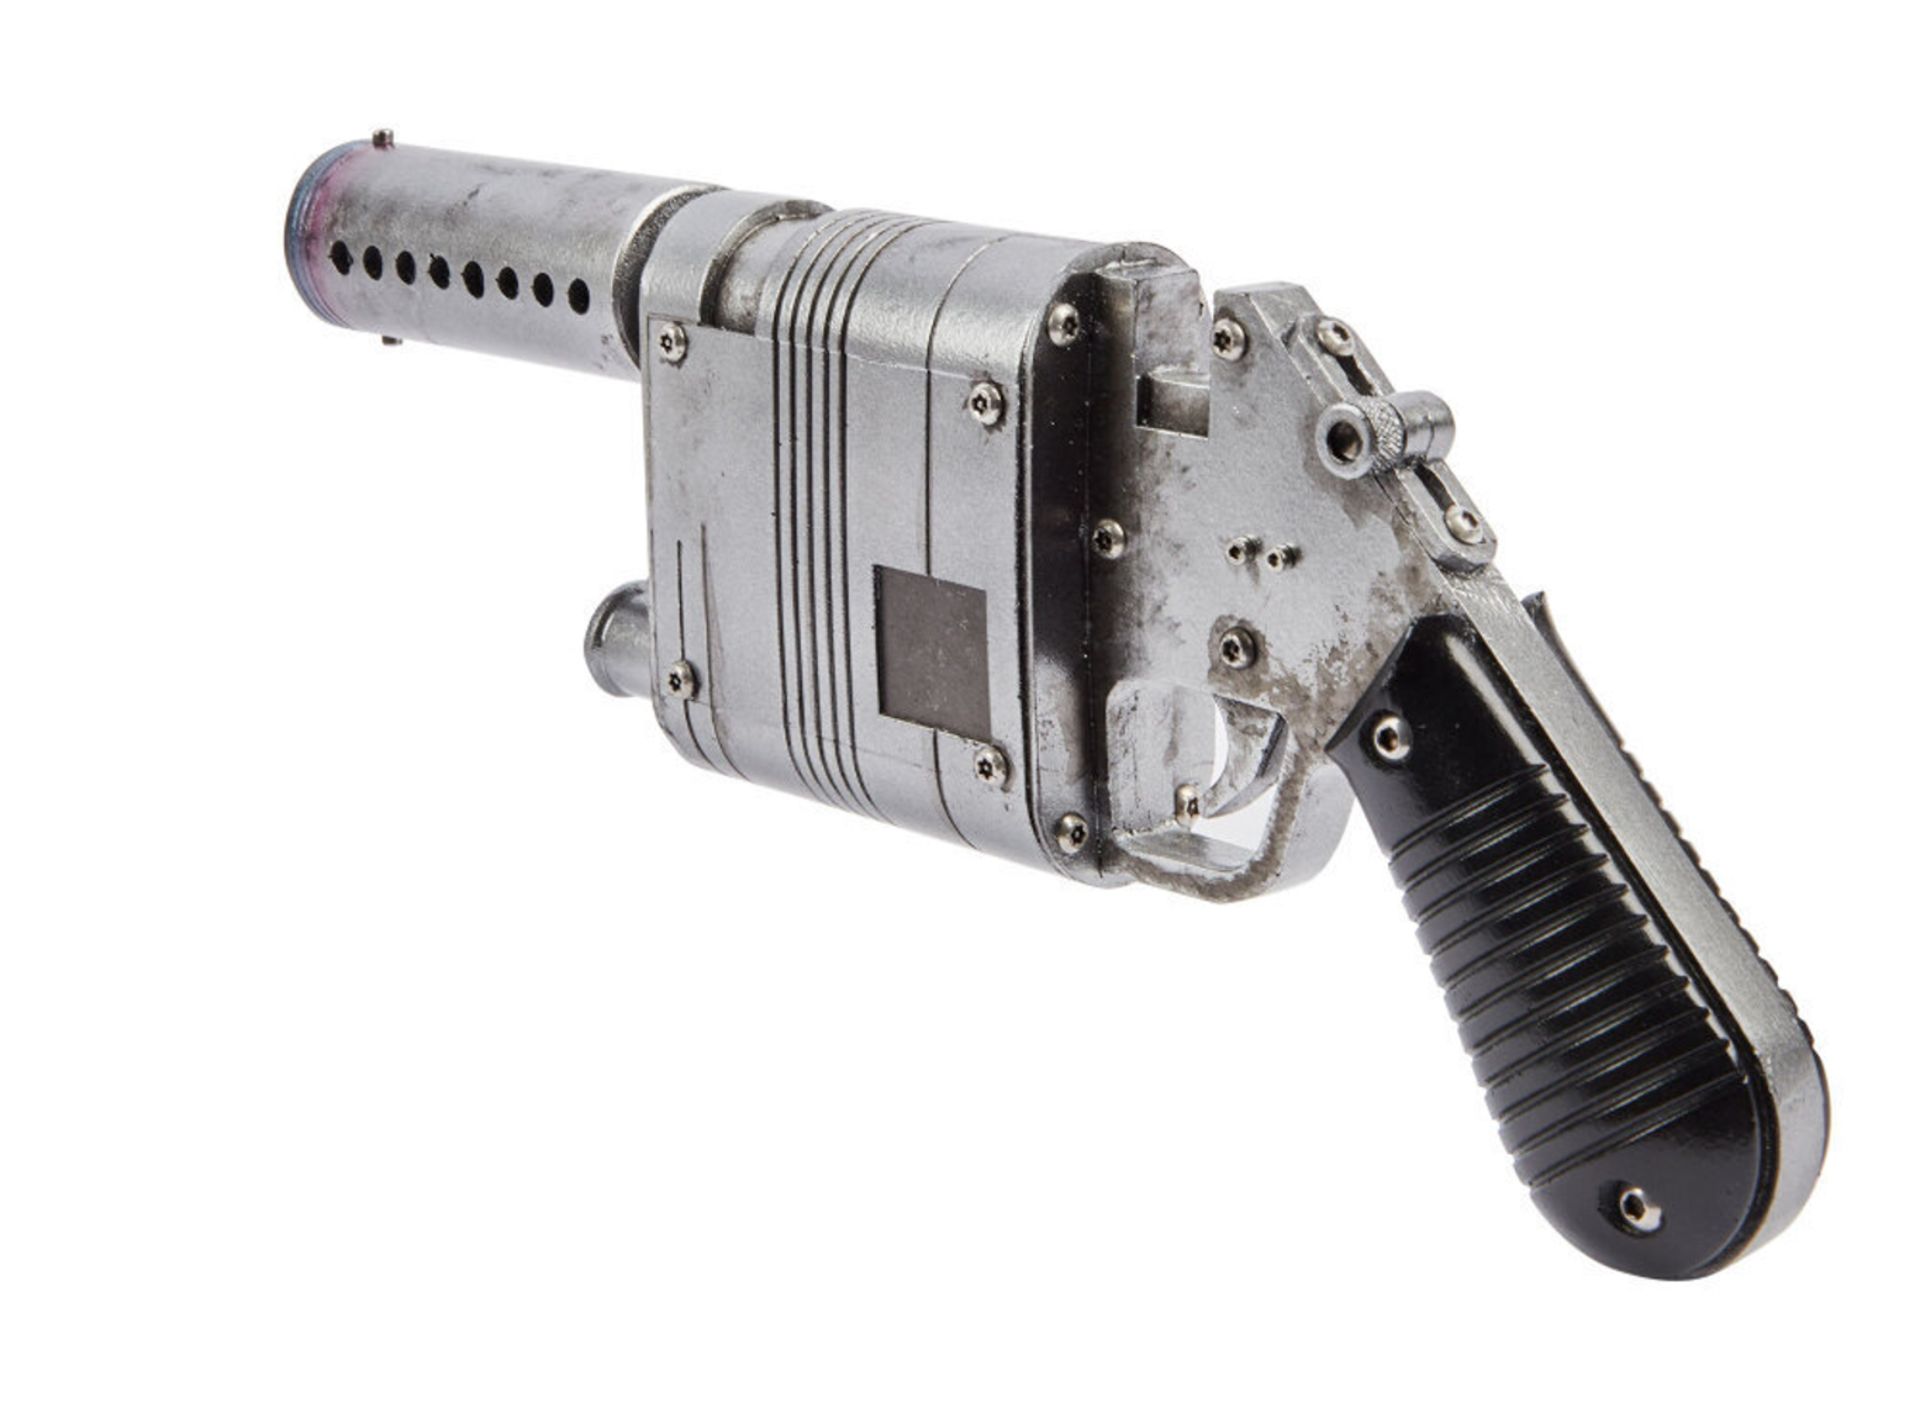 STAR WARS - THE FORCE AWAKENS | DAISY RIDLEY "REY" NN-14 BLASTER PROP (WITH DVD) - Image 6 of 15